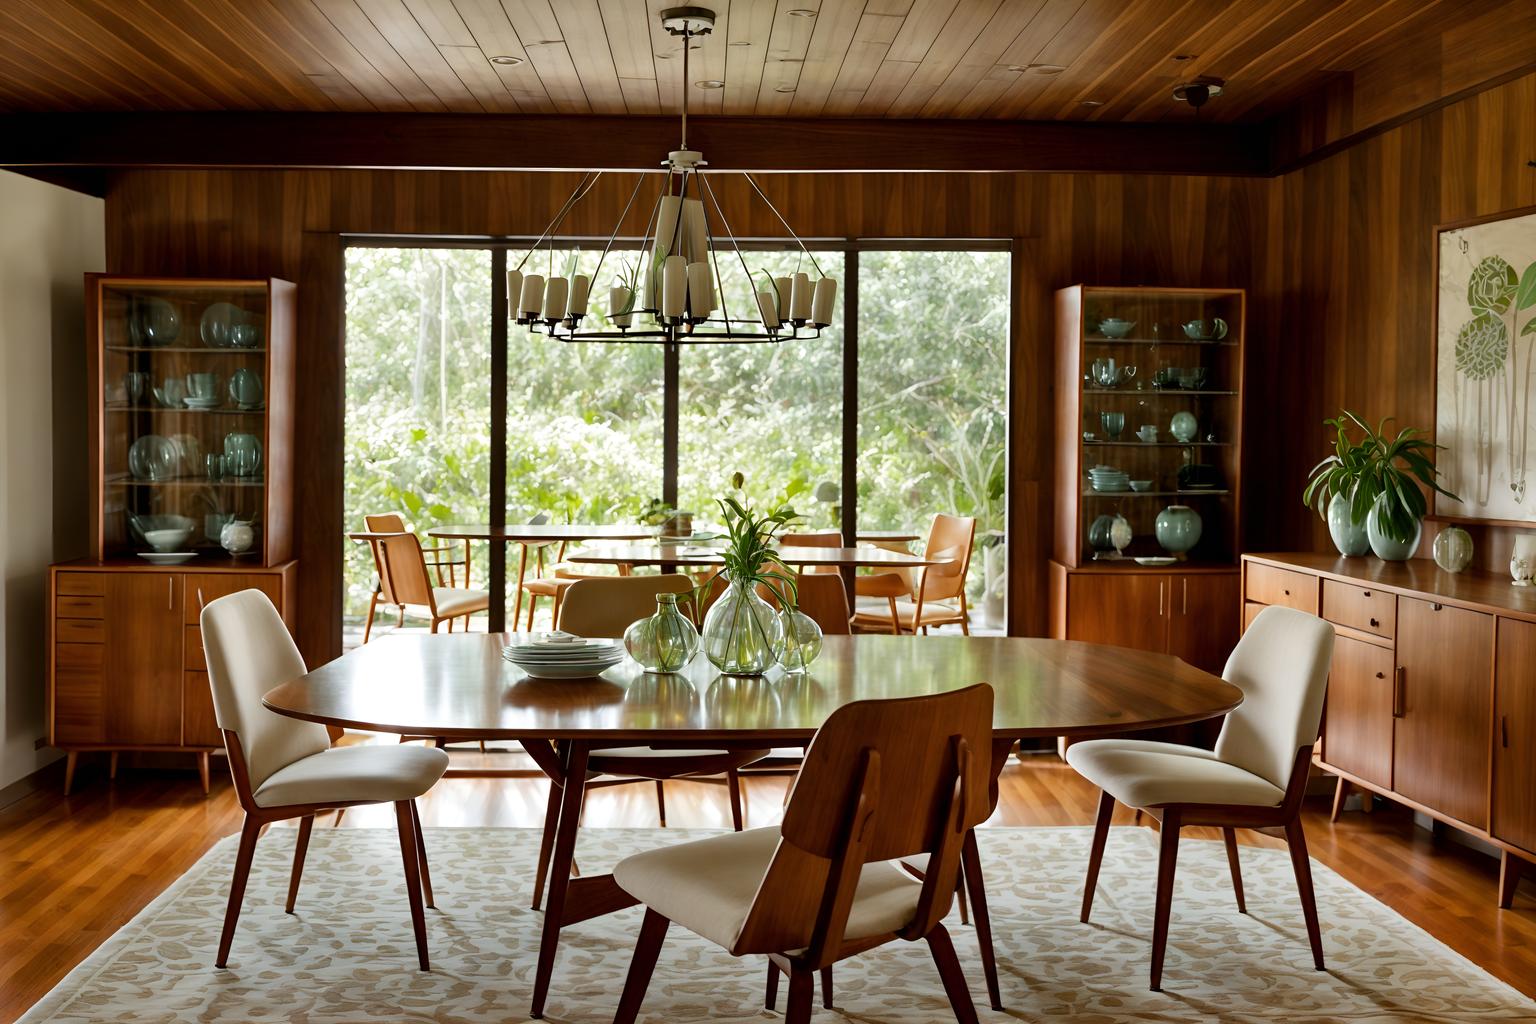 Midcentury modern-style (dining room interior) With dining table chairs and table cloth and vase and light or chandelier and bookshelves and plant and plates, cutlery and glasses on dining table and dining table. . With integrating indoor and outdoor motifs and wood pendant light mid century modern chandelier and clean lines and natural and manmade materials and function over form and nature indoors and graphic shapes and mid century modern mobile chandelier. . Cinematic photo, highly detailed, cinematic lighting, ultra-detailed, ultrarealistic, photorealism, 8k. Midcentury modern interior design style